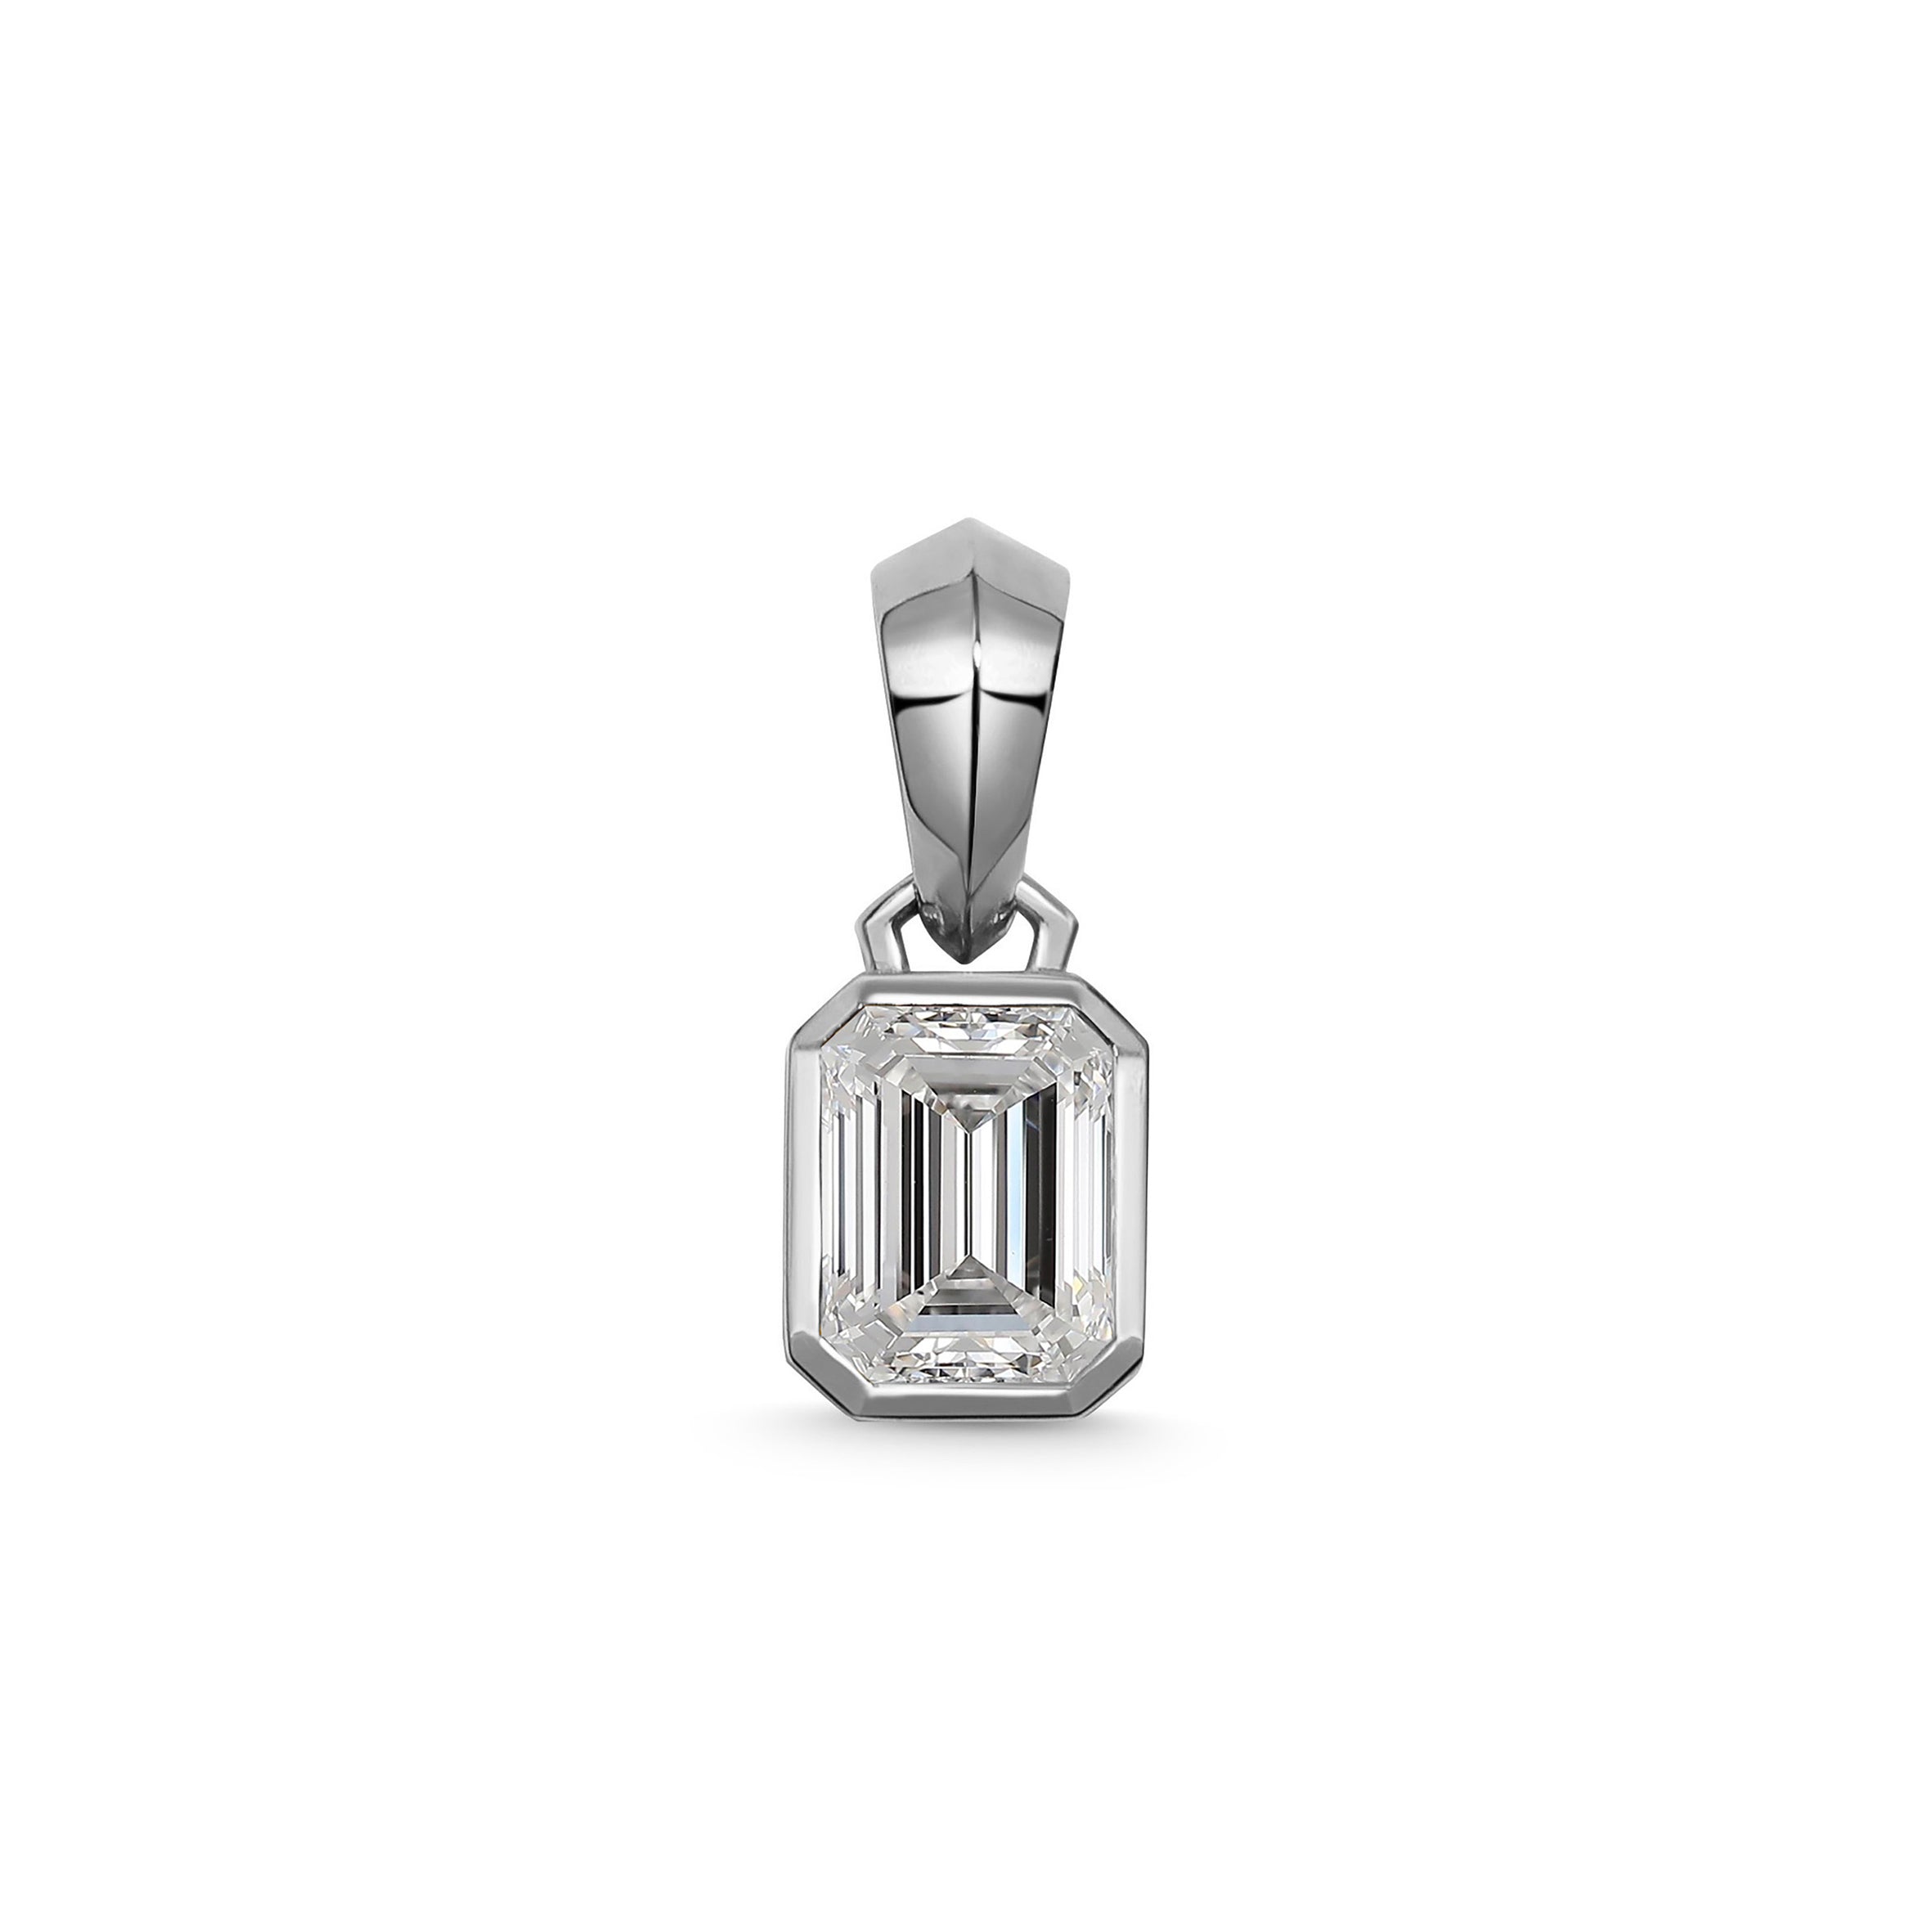 The Chunky Charm Pendant - Emerald Cut by East London jeweller Rachel Boston | Discover our collections of unique and timeless engagement rings, wedding rings, and modern fine jewellery.